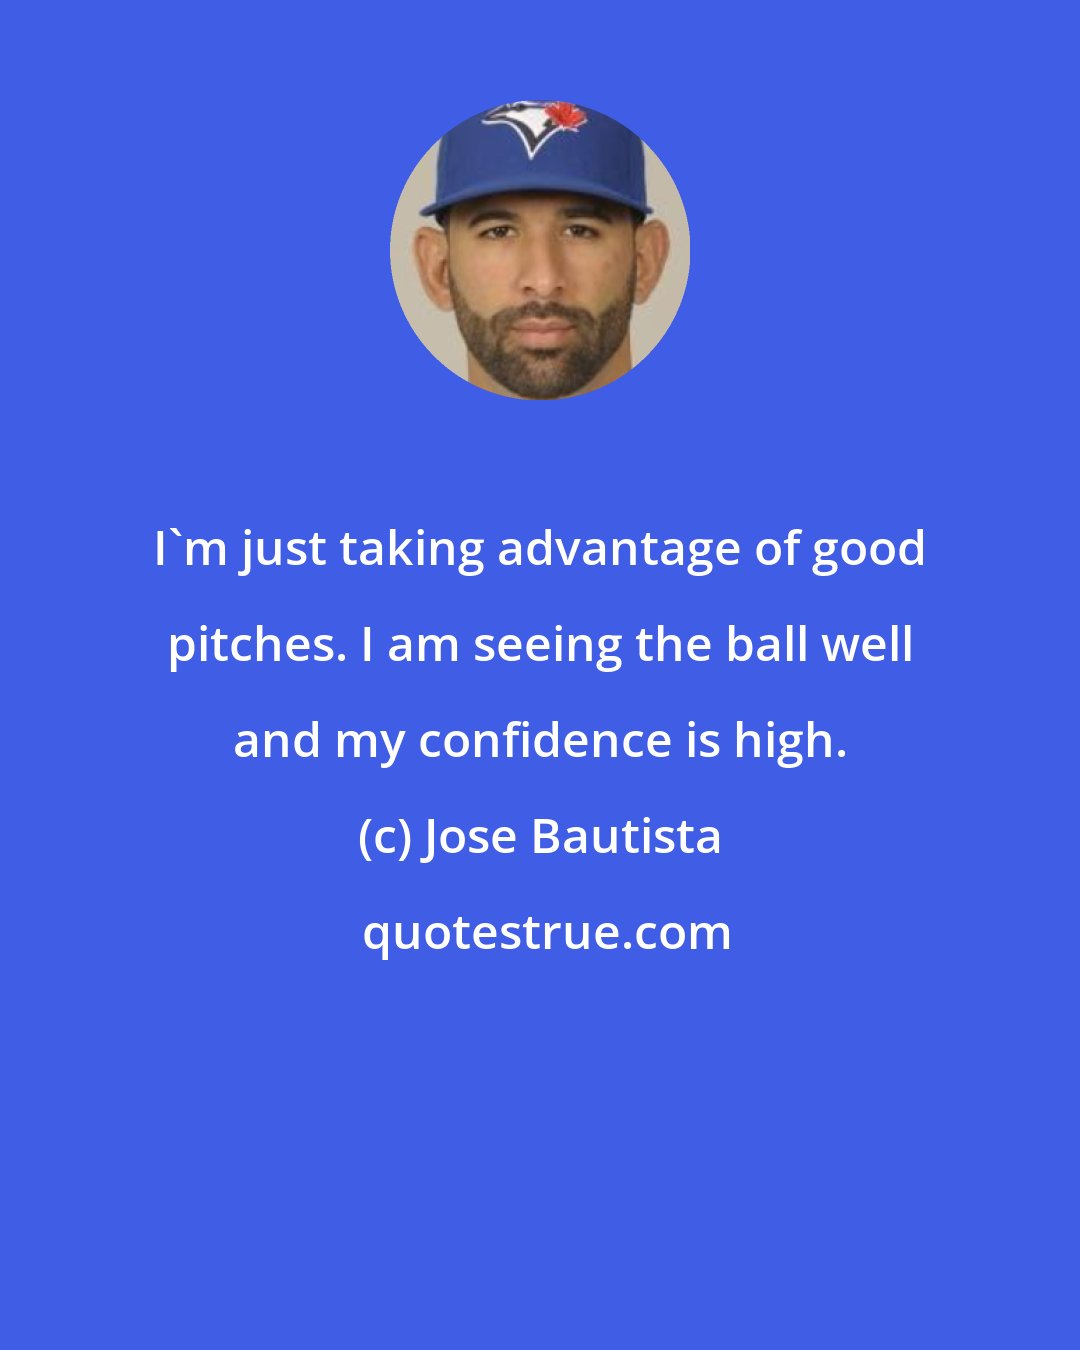 Jose Bautista: I'm just taking advantage of good pitches. I am seeing the ball well and my confidence is high.